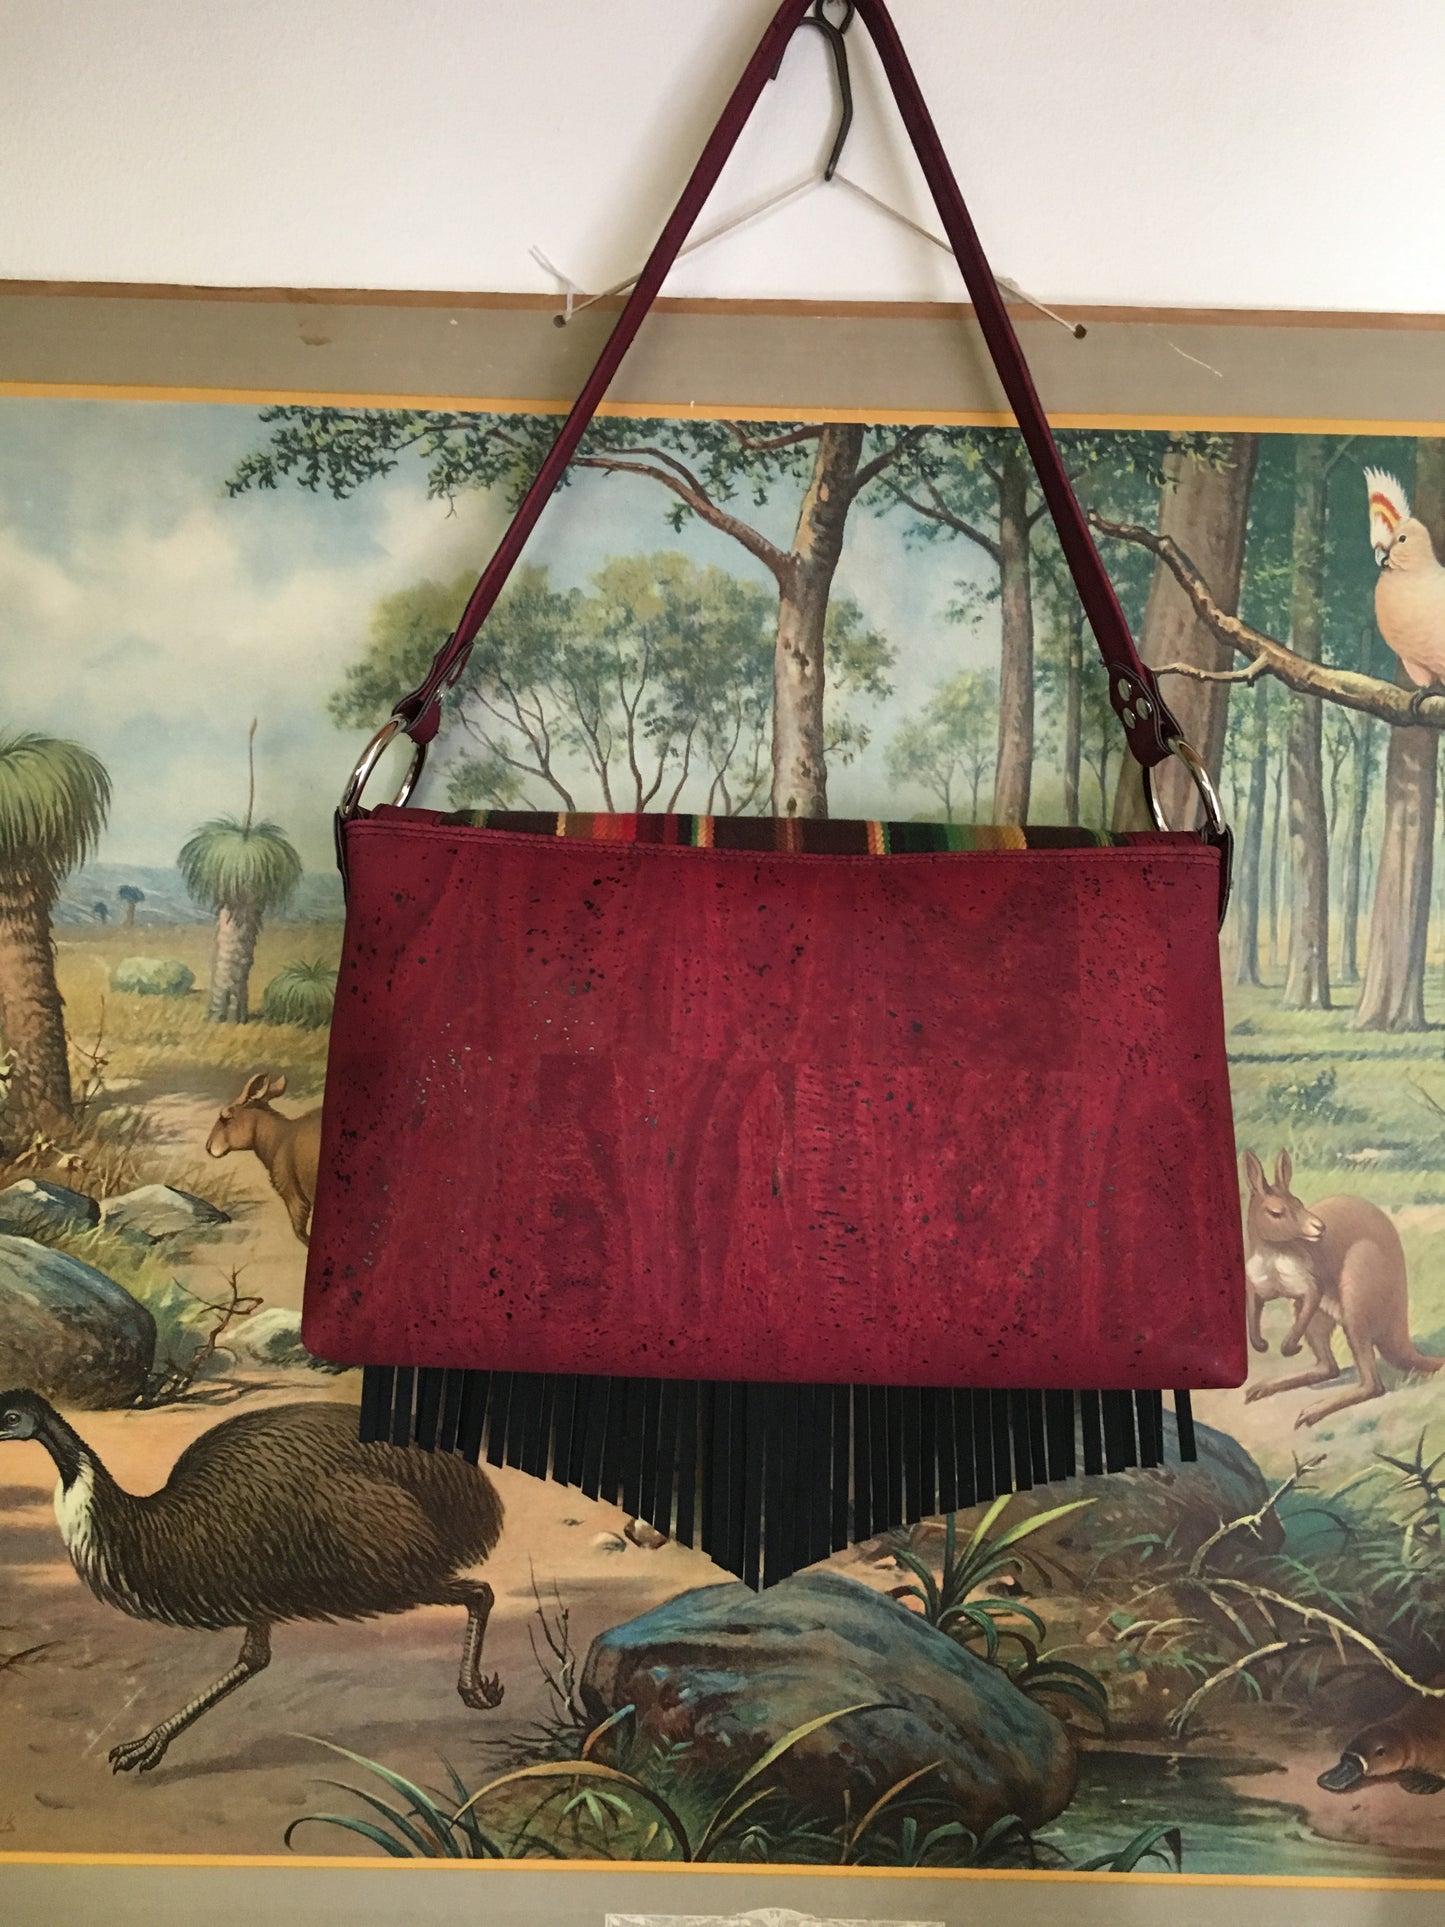 Fringe Saddle Bag in Genuine Sustainable Wine Colored Cork with Chocolate Serape Fabric with 24” (61cm) shoulder strap, magnetic closure, inside open divided pocket and zipper pocket with J.T. Christensen Designs Signature Label and hidden serial number. Ships from Sweden